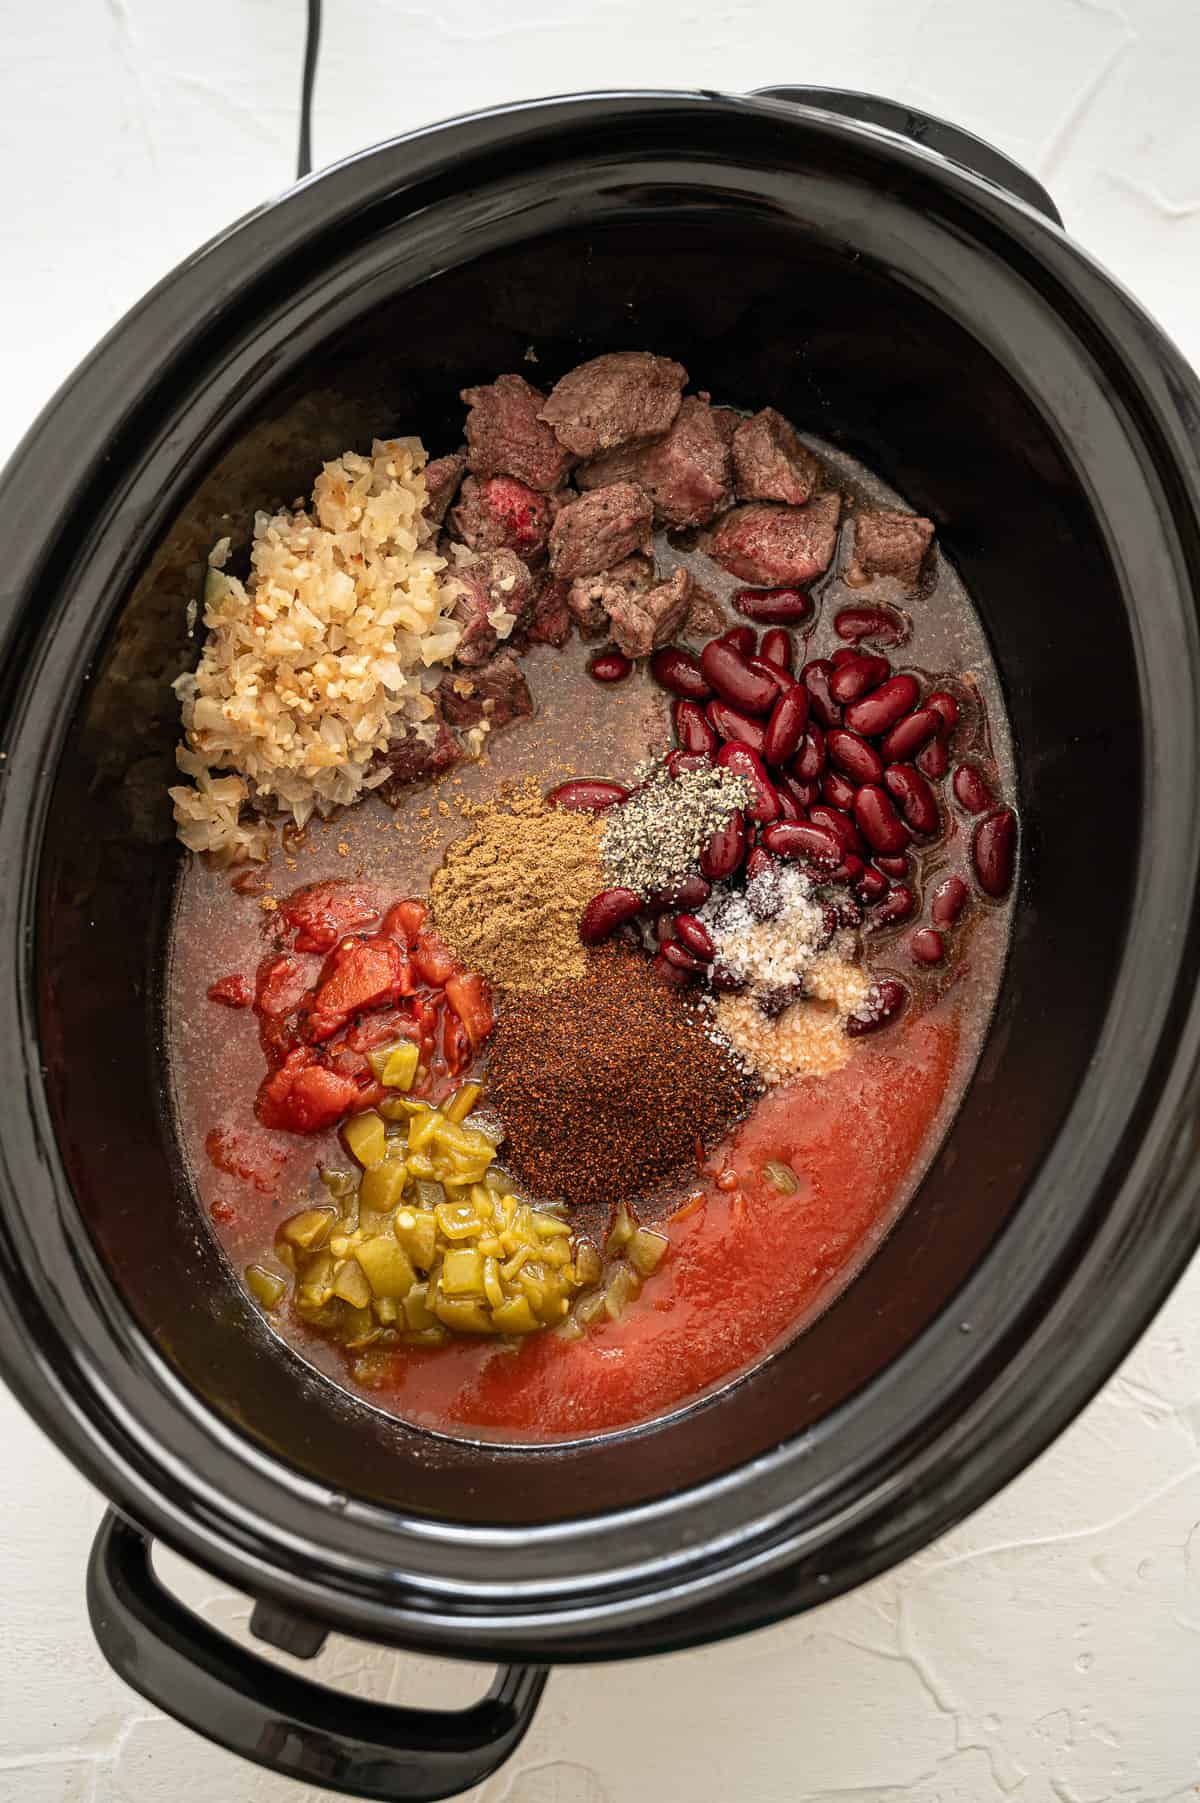 Ingredients for steak chili dumped in a slow cooker.